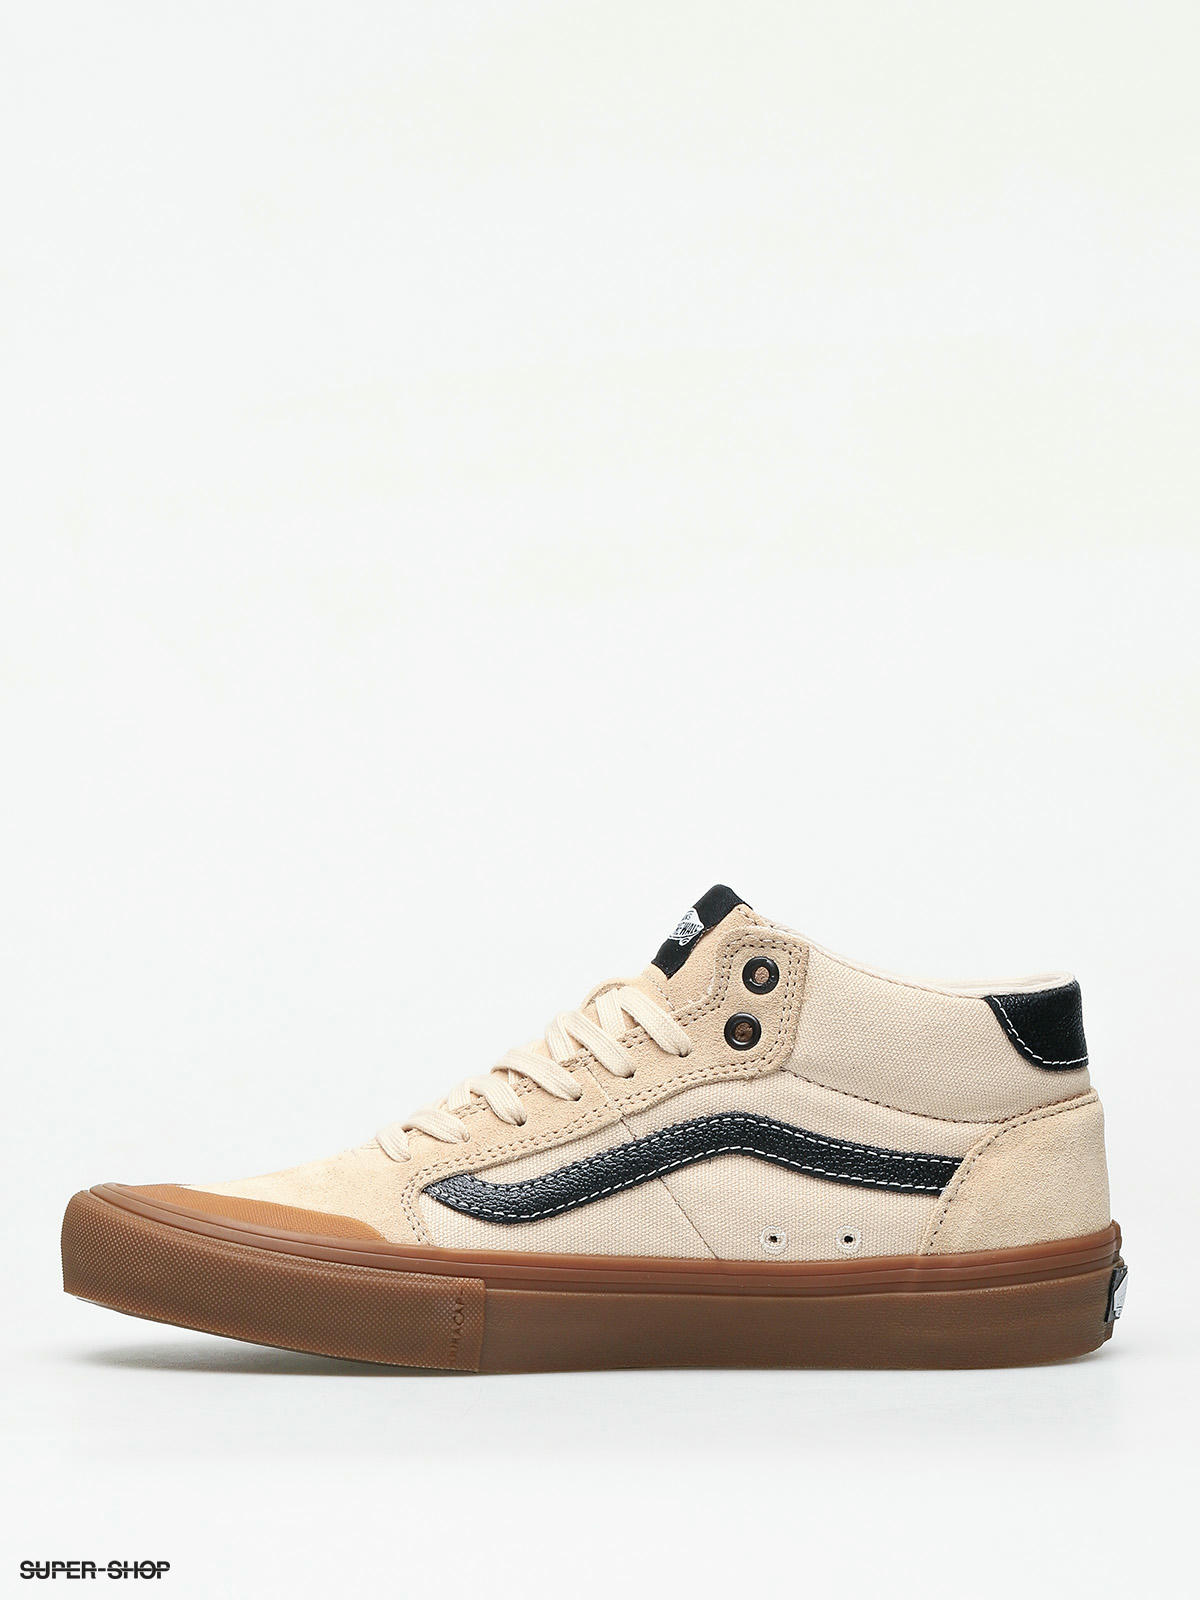 Vans Style 112 Mid Pro Shoes (ty morrow 